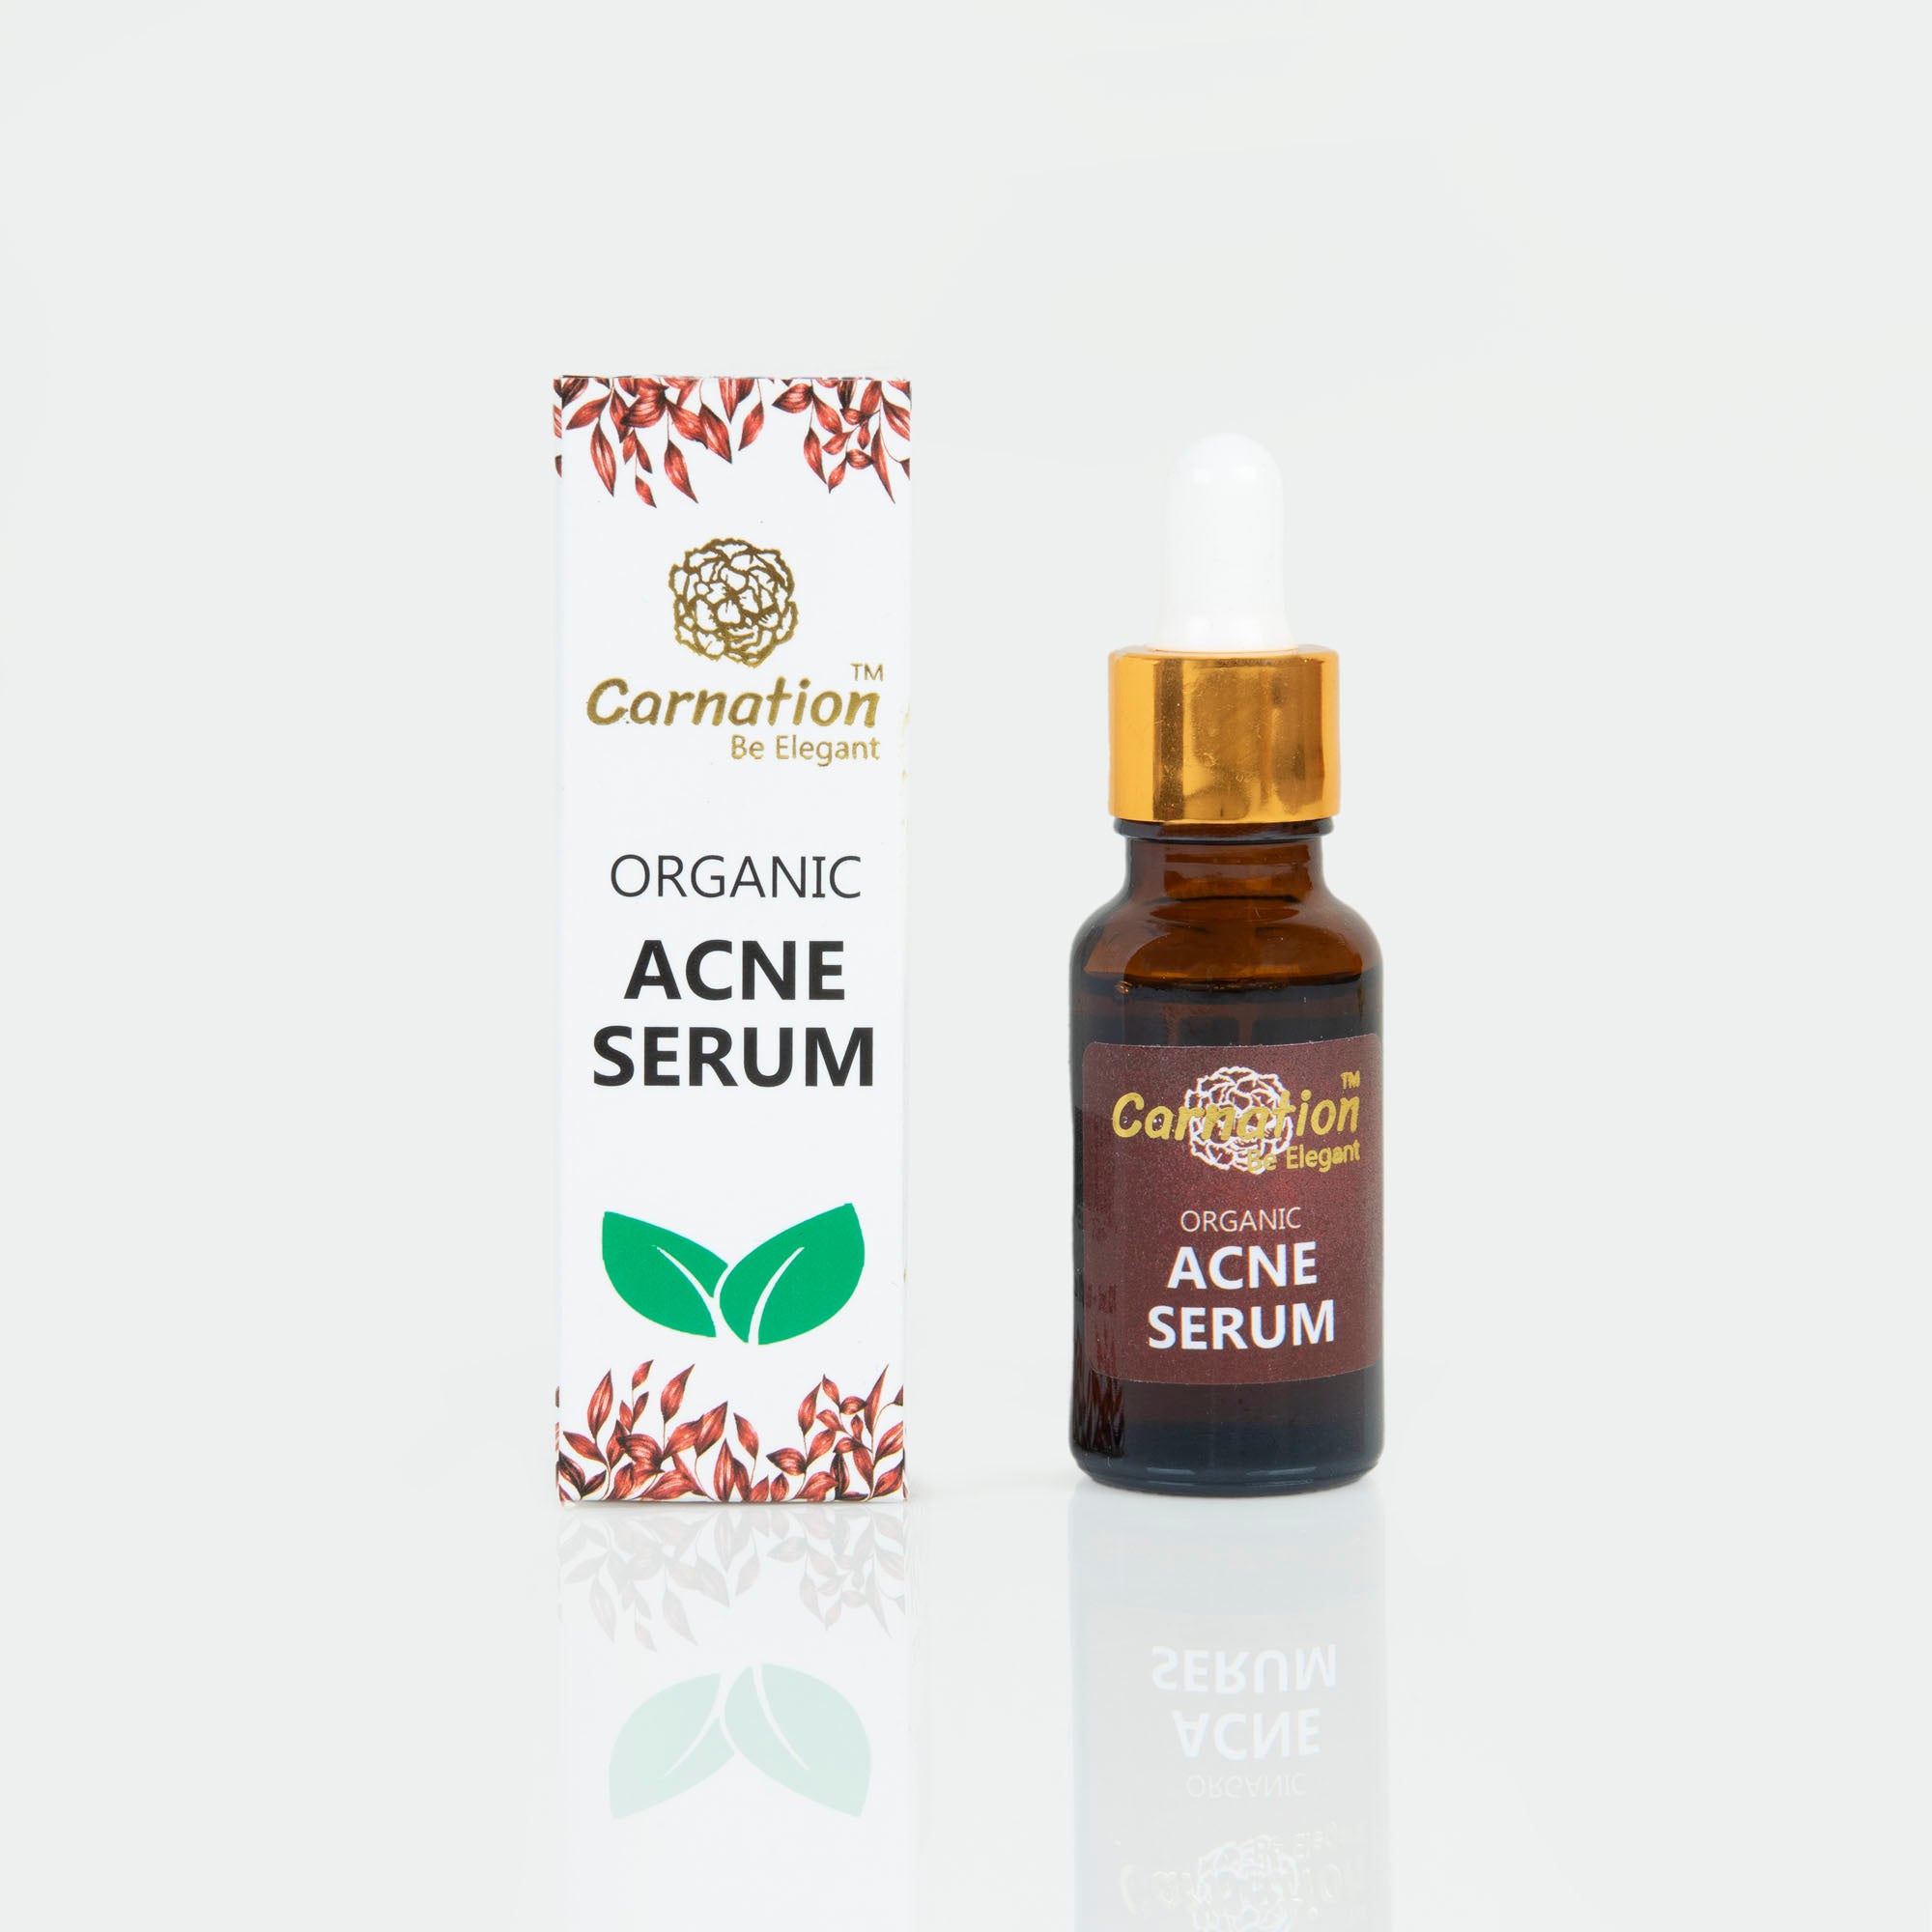 ACNE CARE - ALL IN ONE DEAL